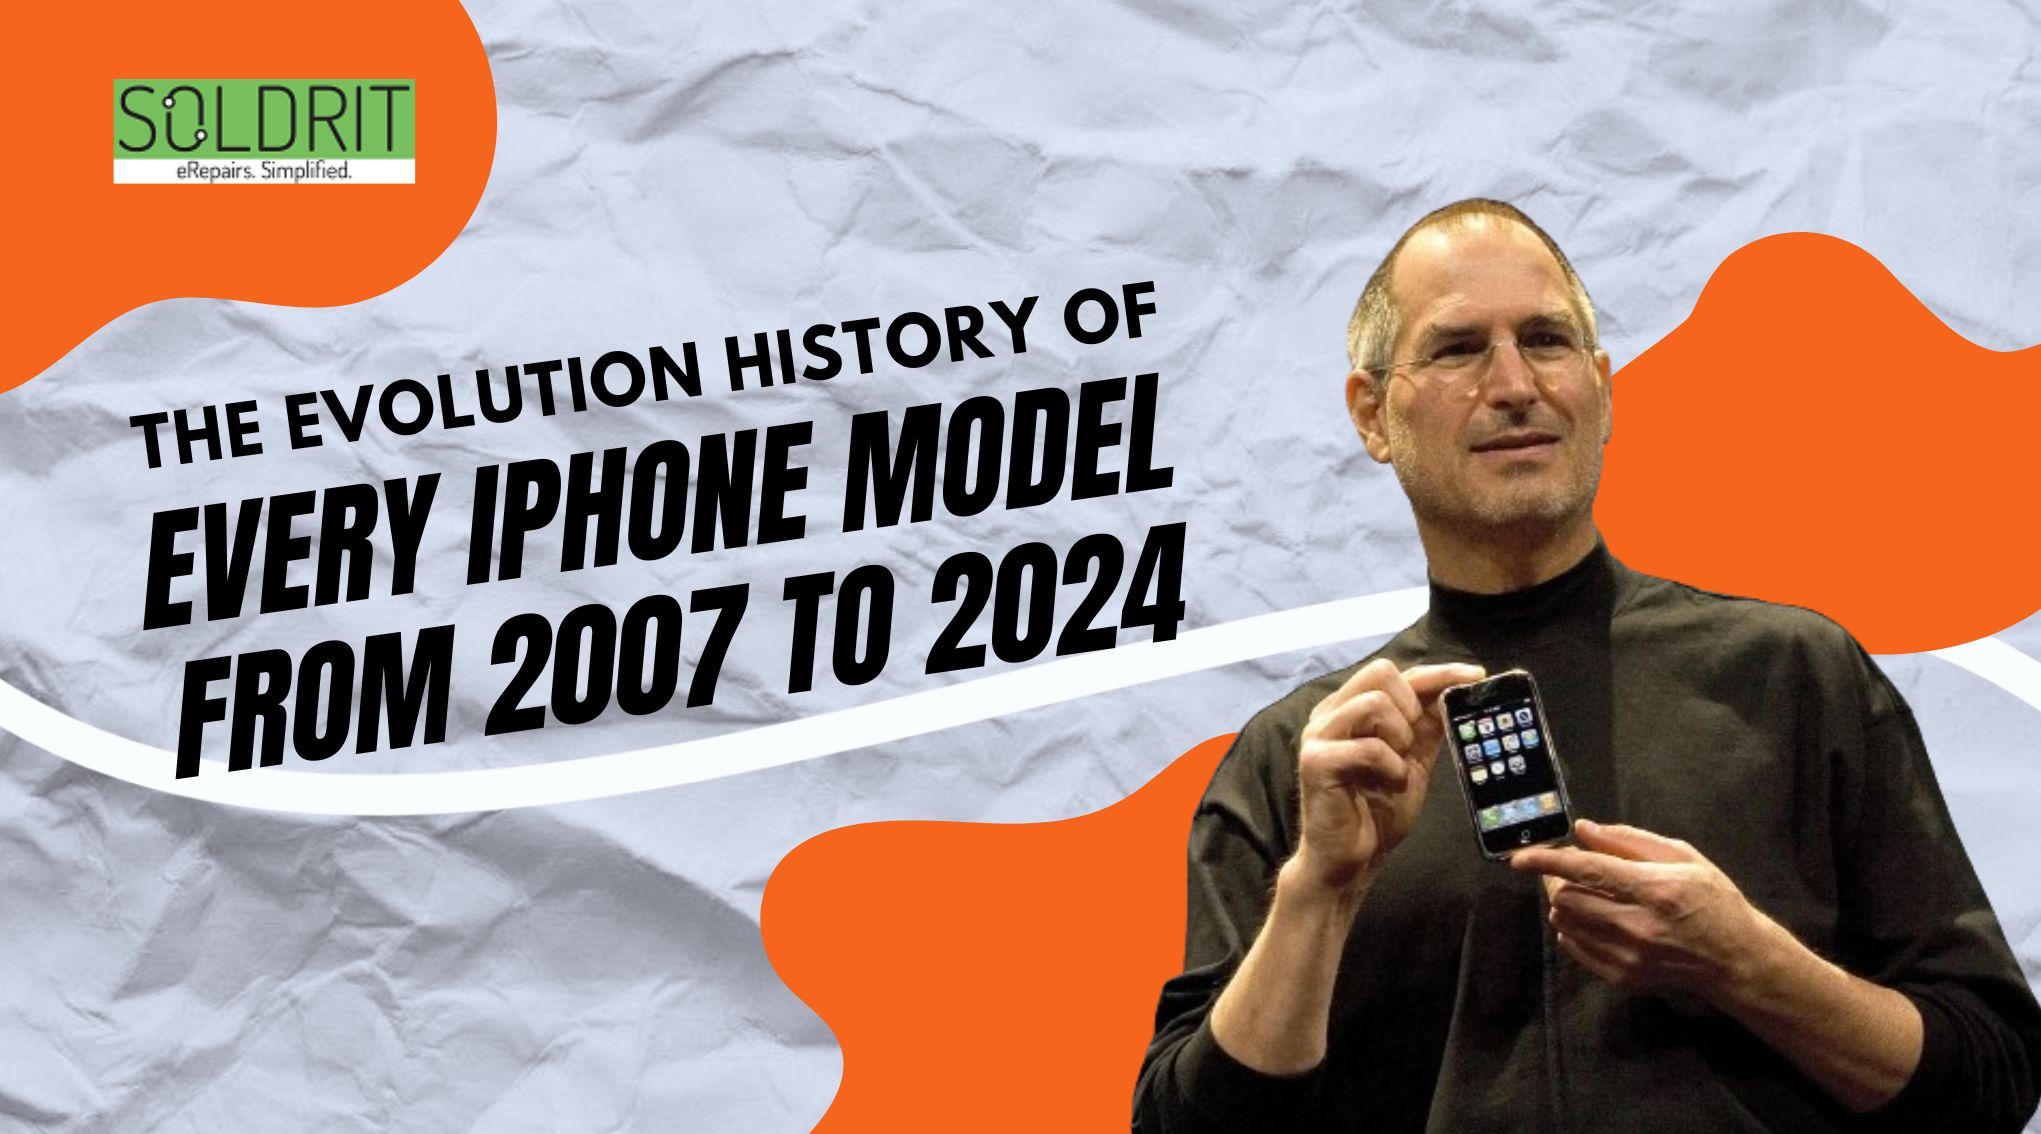 The Evolution History of Every iPhone Model from 2007 to 2024